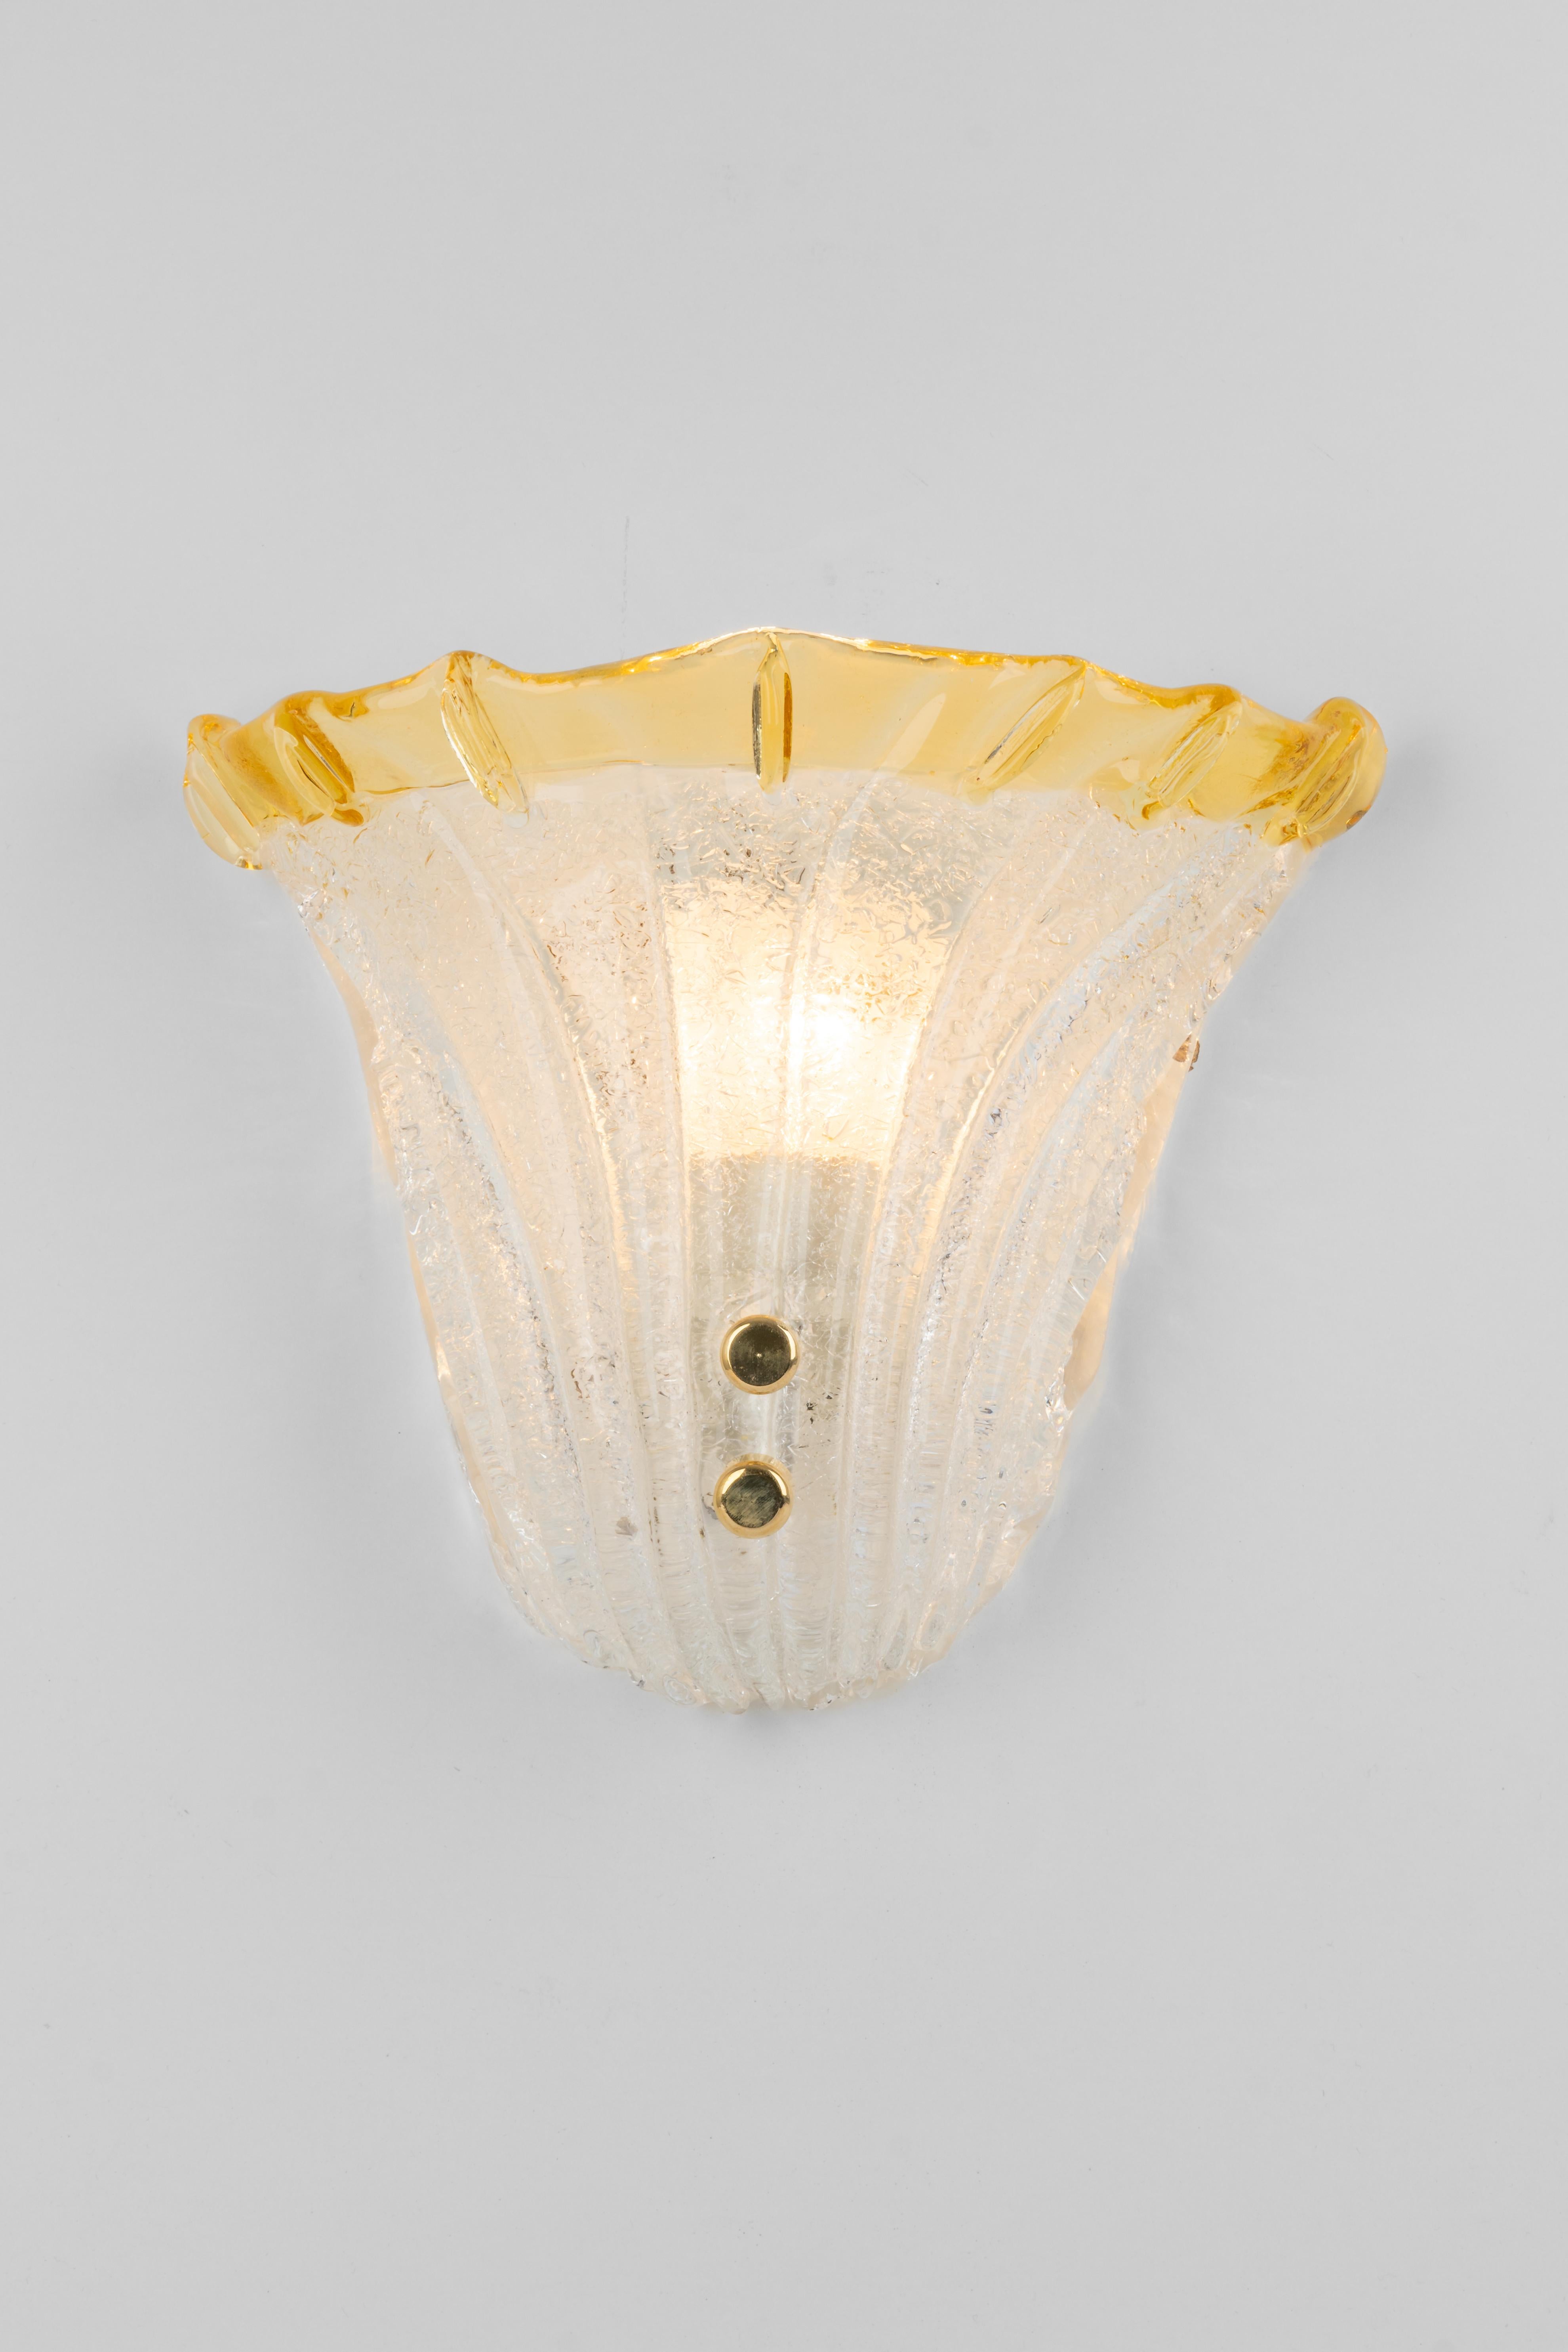 Pair of beautiful wall lights with Murano glass in Venini style, Italy. Manufactured circa 1970s.
Very good quality and condition. Cleaned, well-wired and ready to use. 

Each fixture requires 1 small bulb (E-14) / up to 60 W
Light bulbs are not